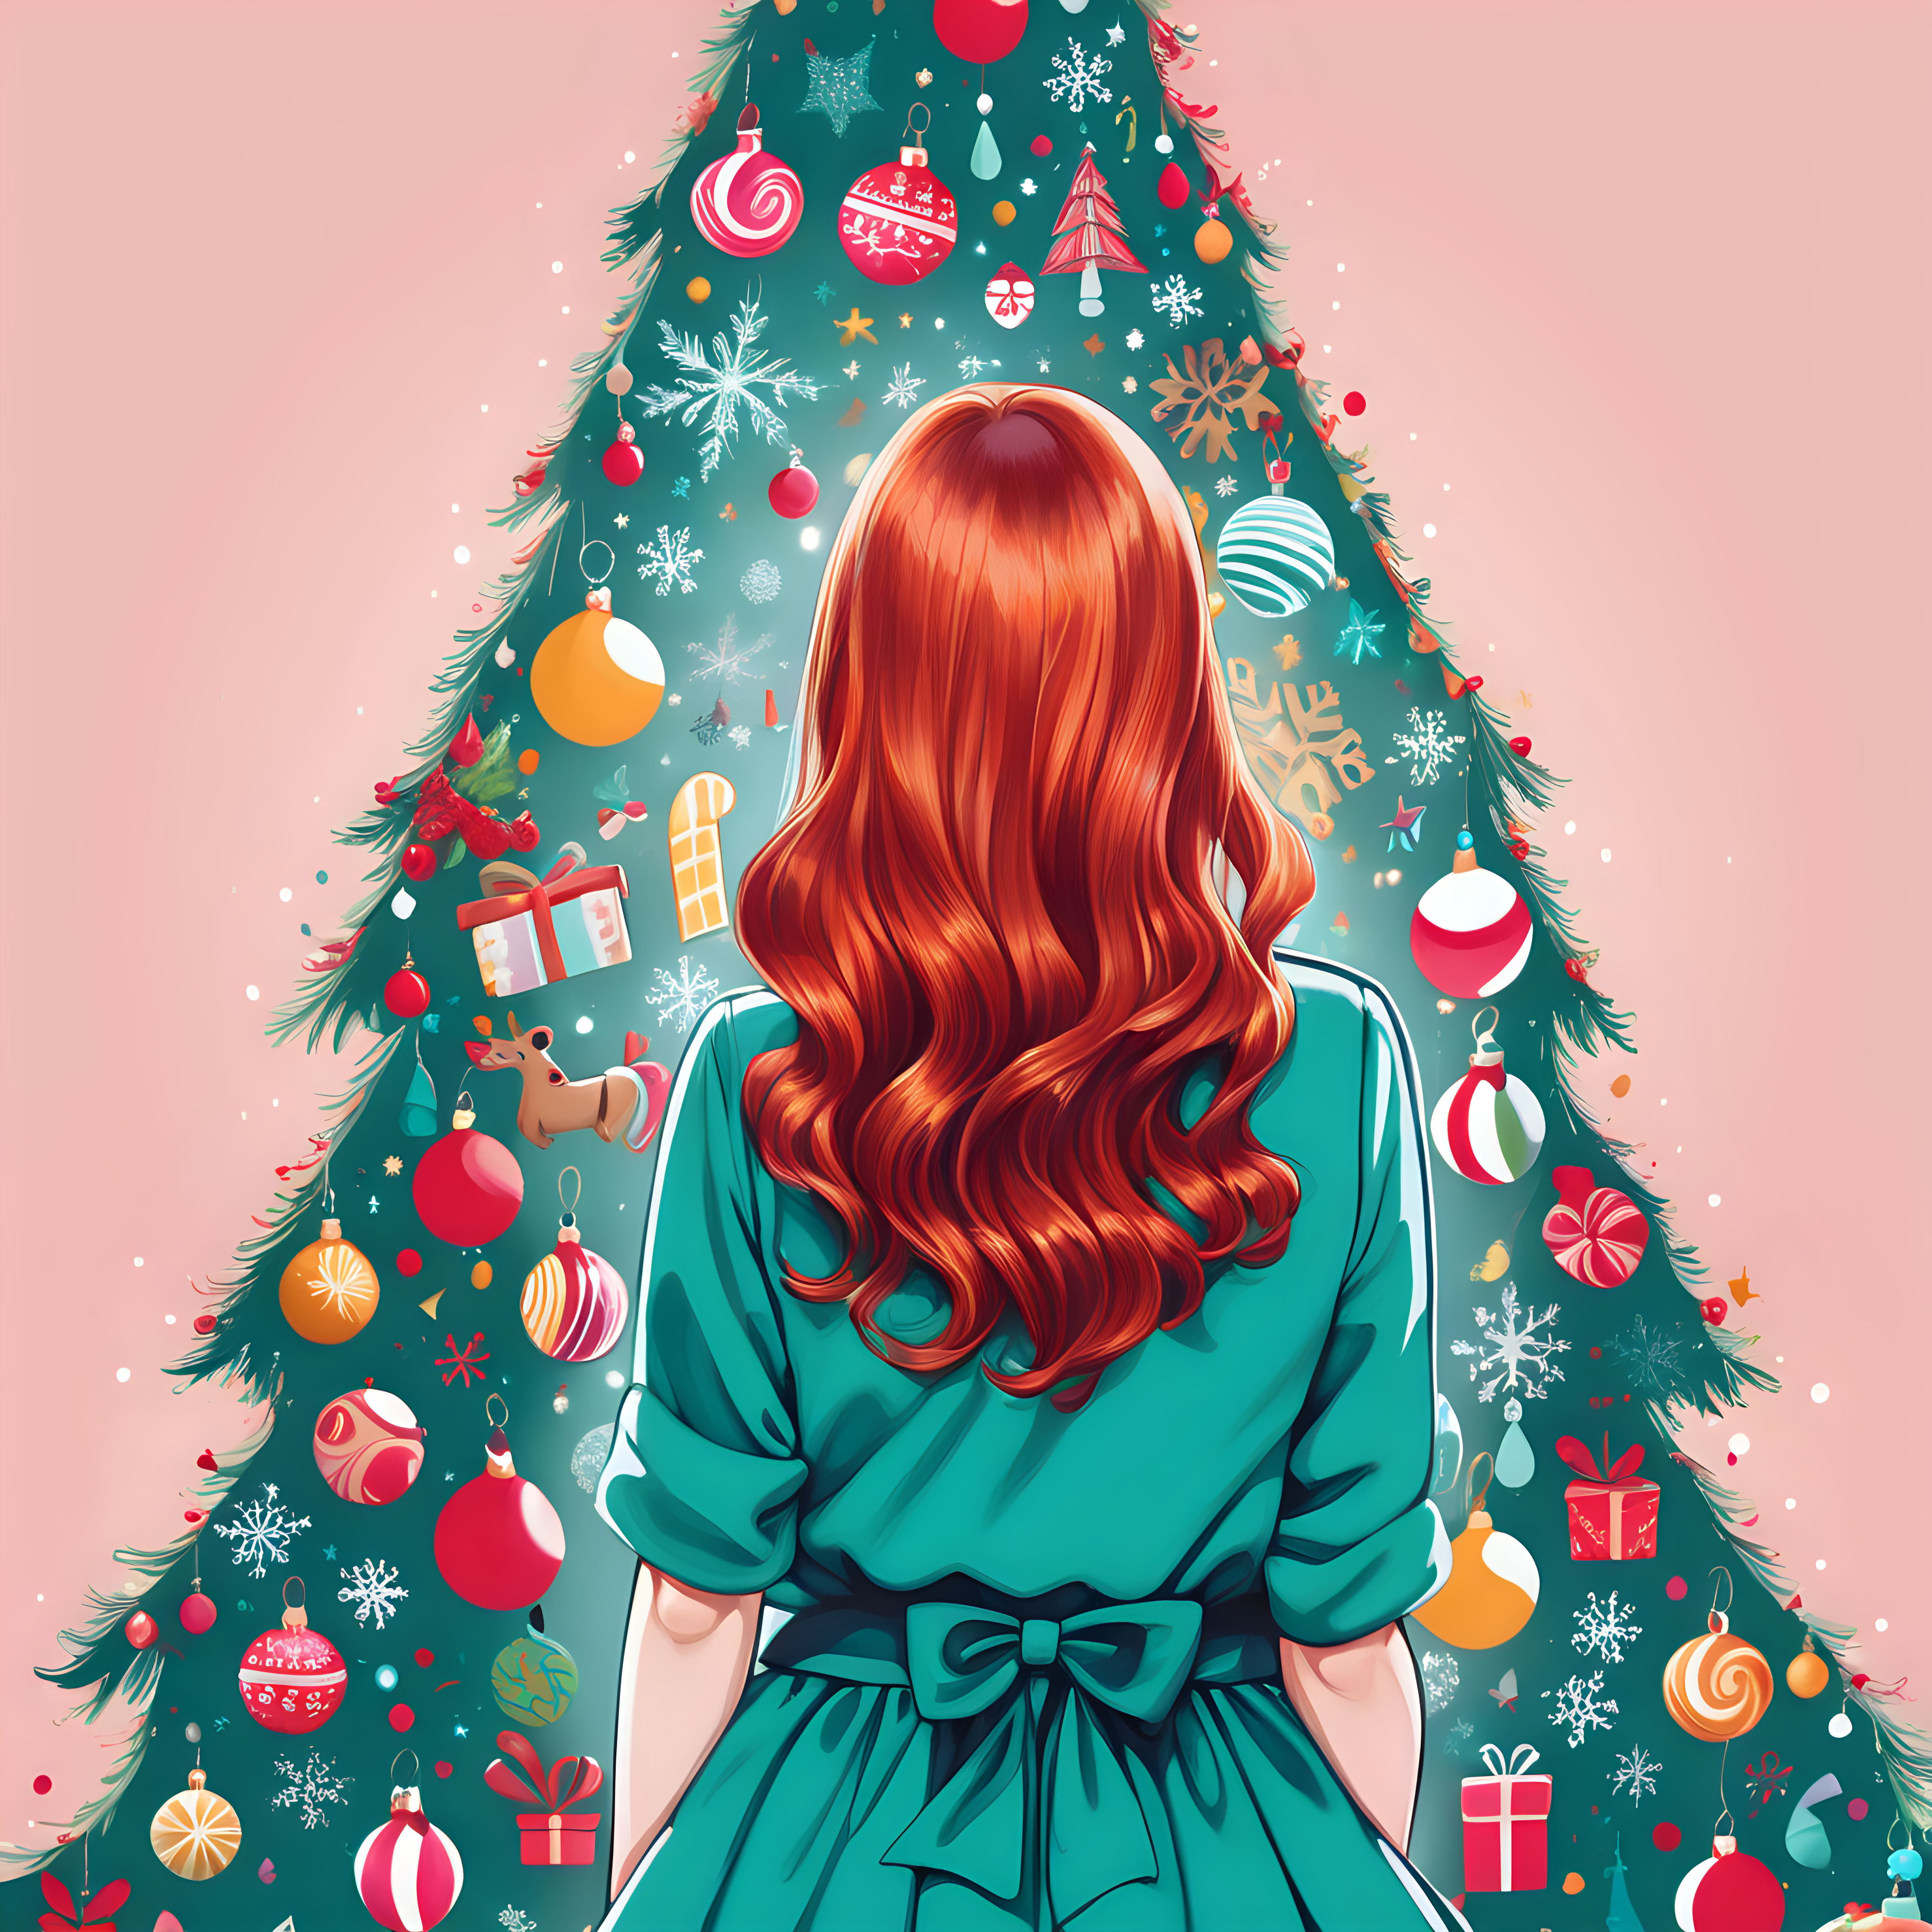 Colourful picture the back of a woman with auburn hair and a fun christmas tree

